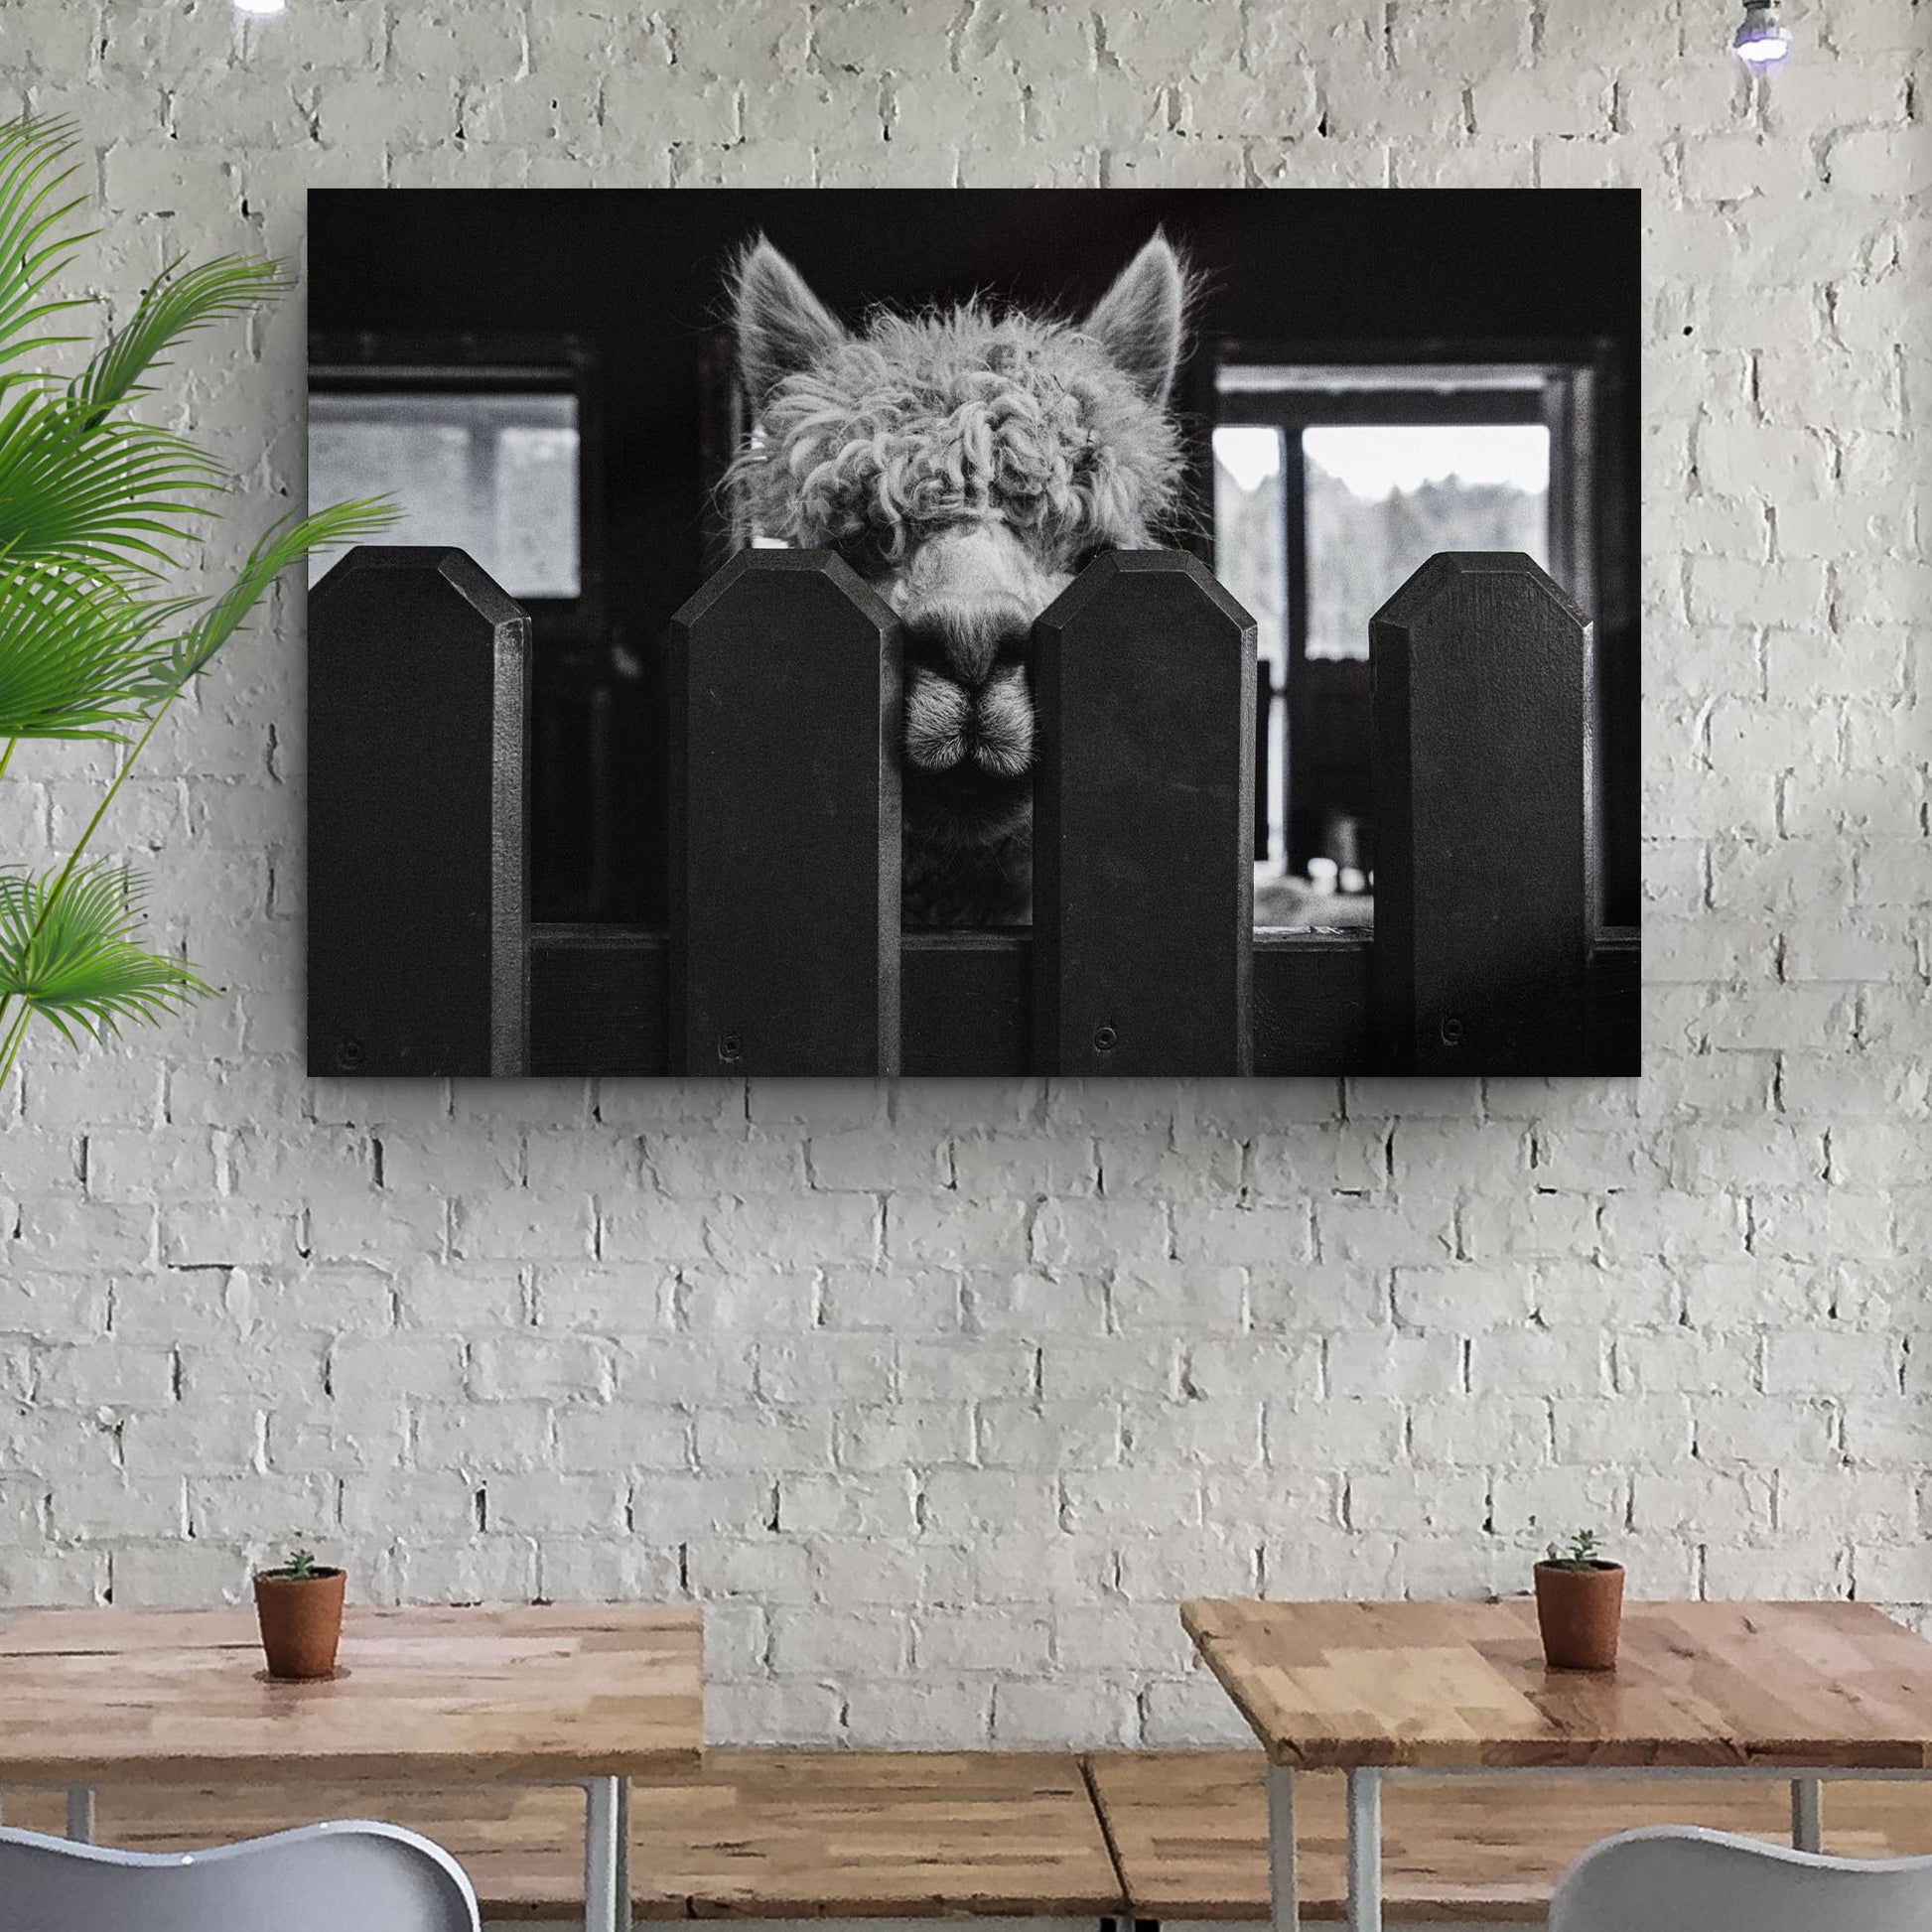 Monochrome Alpaca Behind The Fence Canvas Wall Art - Image by Tailored Canvases